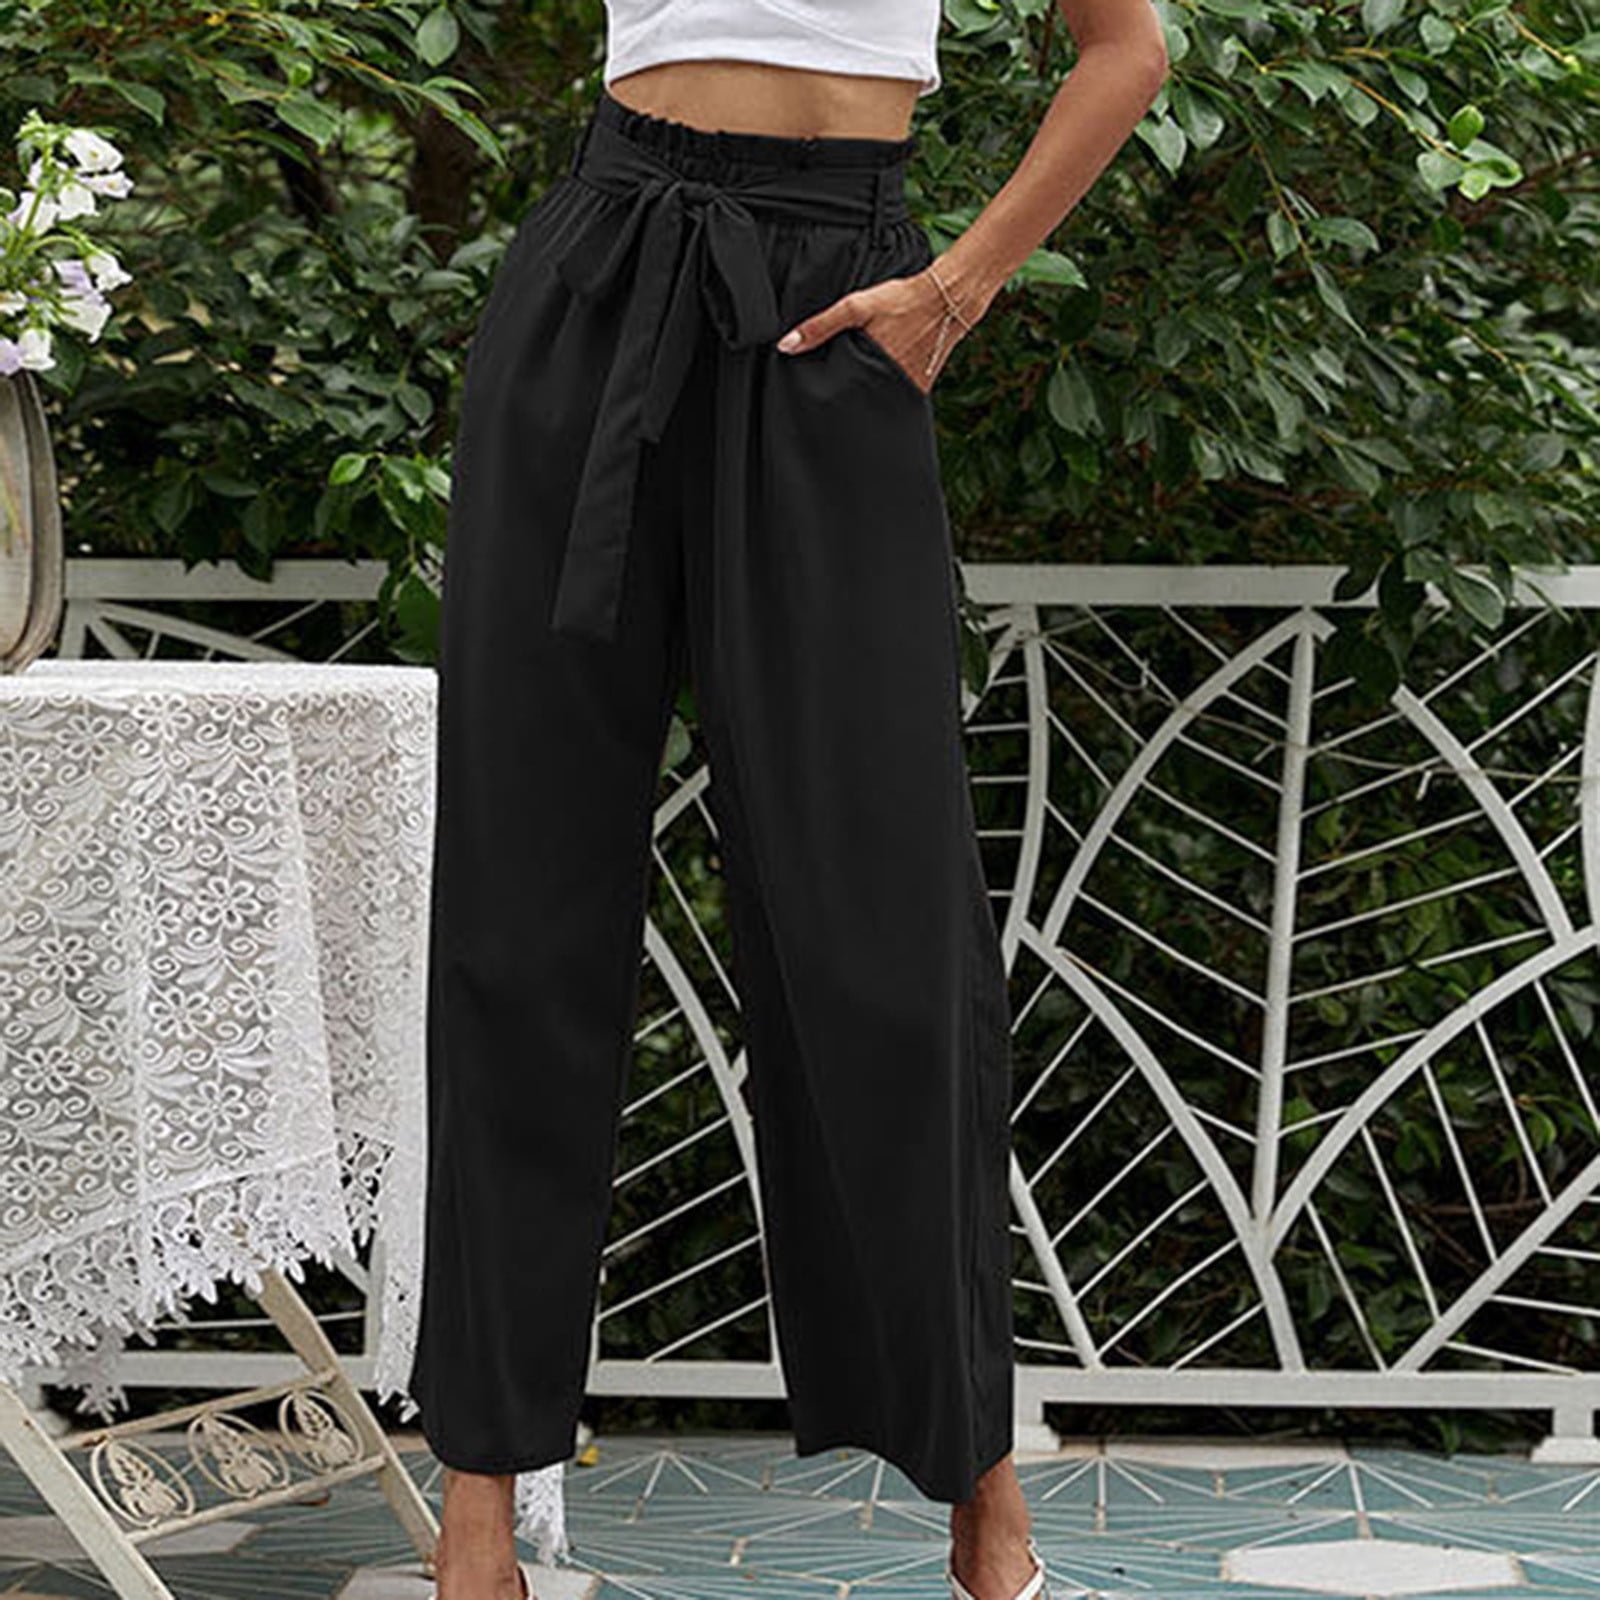 Pin by Alexa Achberger on Summer Style | Wide leg pants outfit, Classy  outfits, Fashion